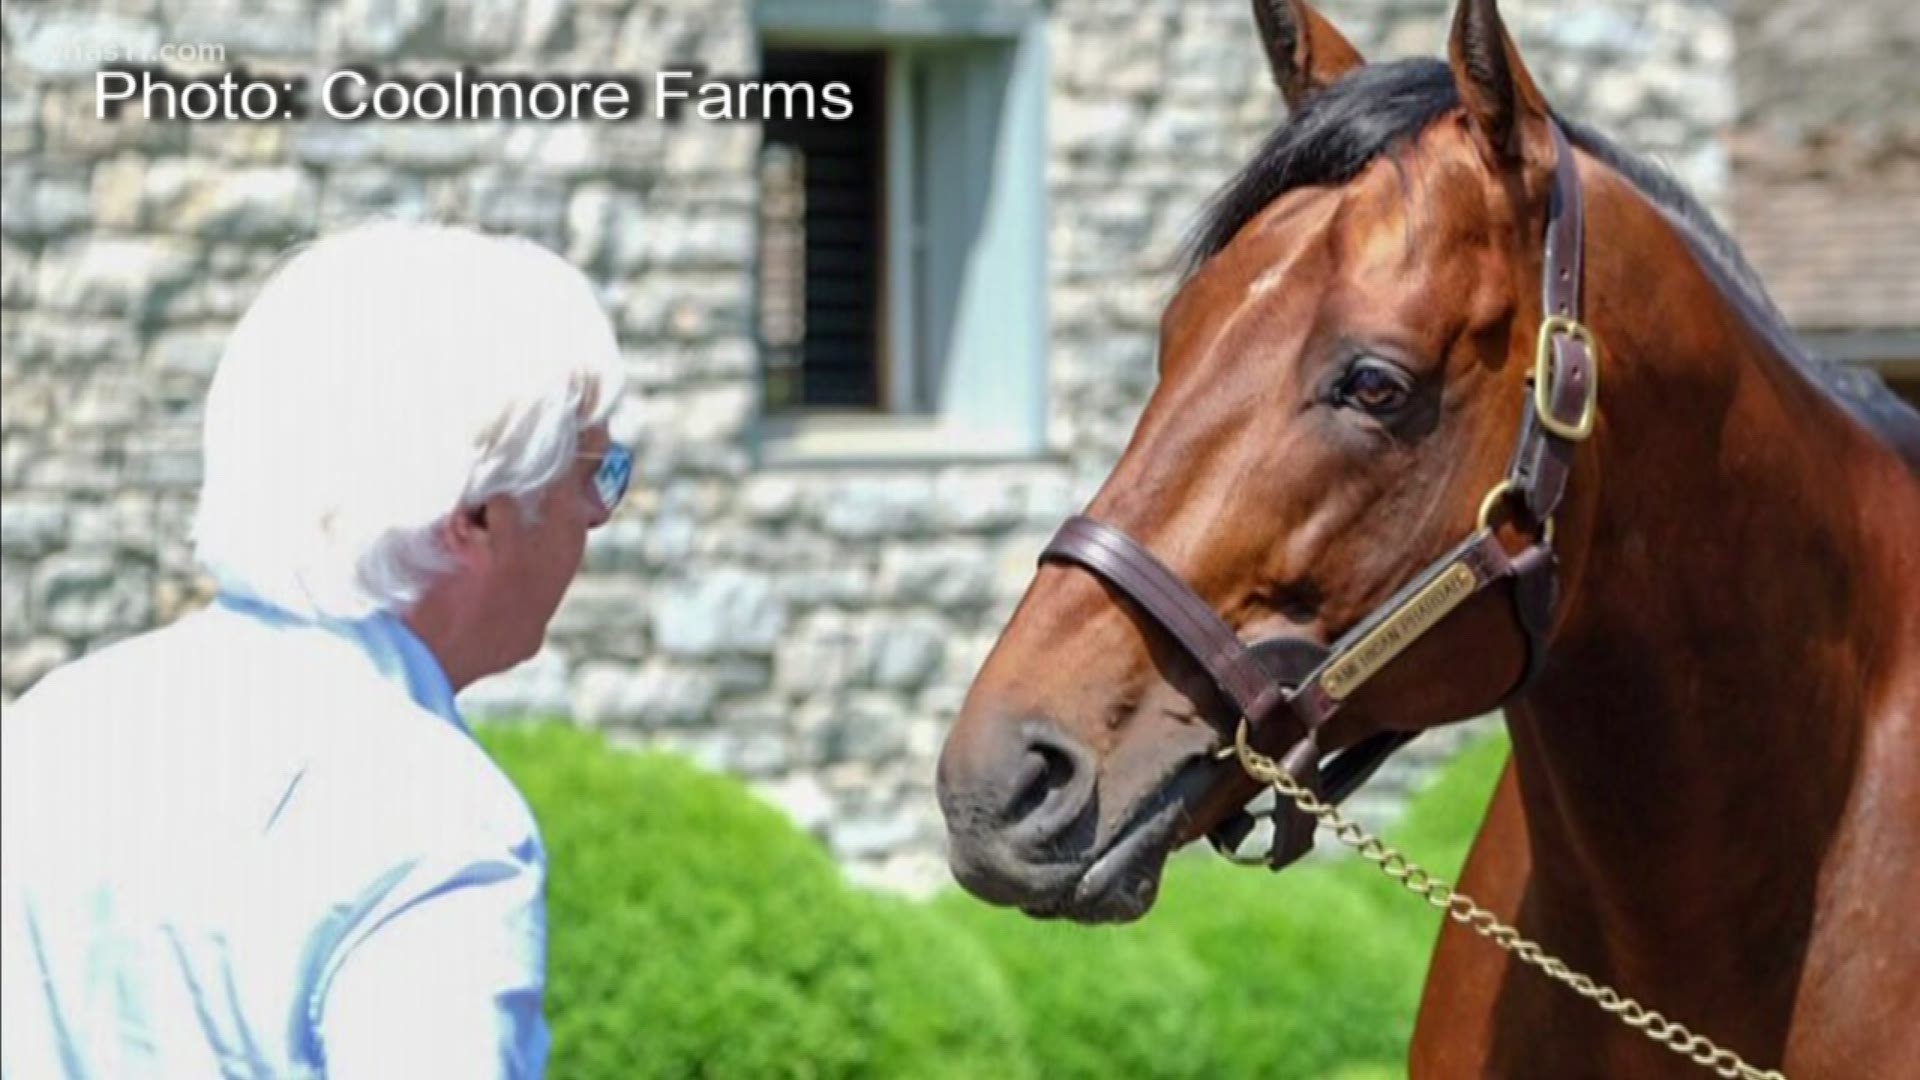 WHAS11 Anchor Doug Proffitt catches up with American Pharoah at Coolmore Farms